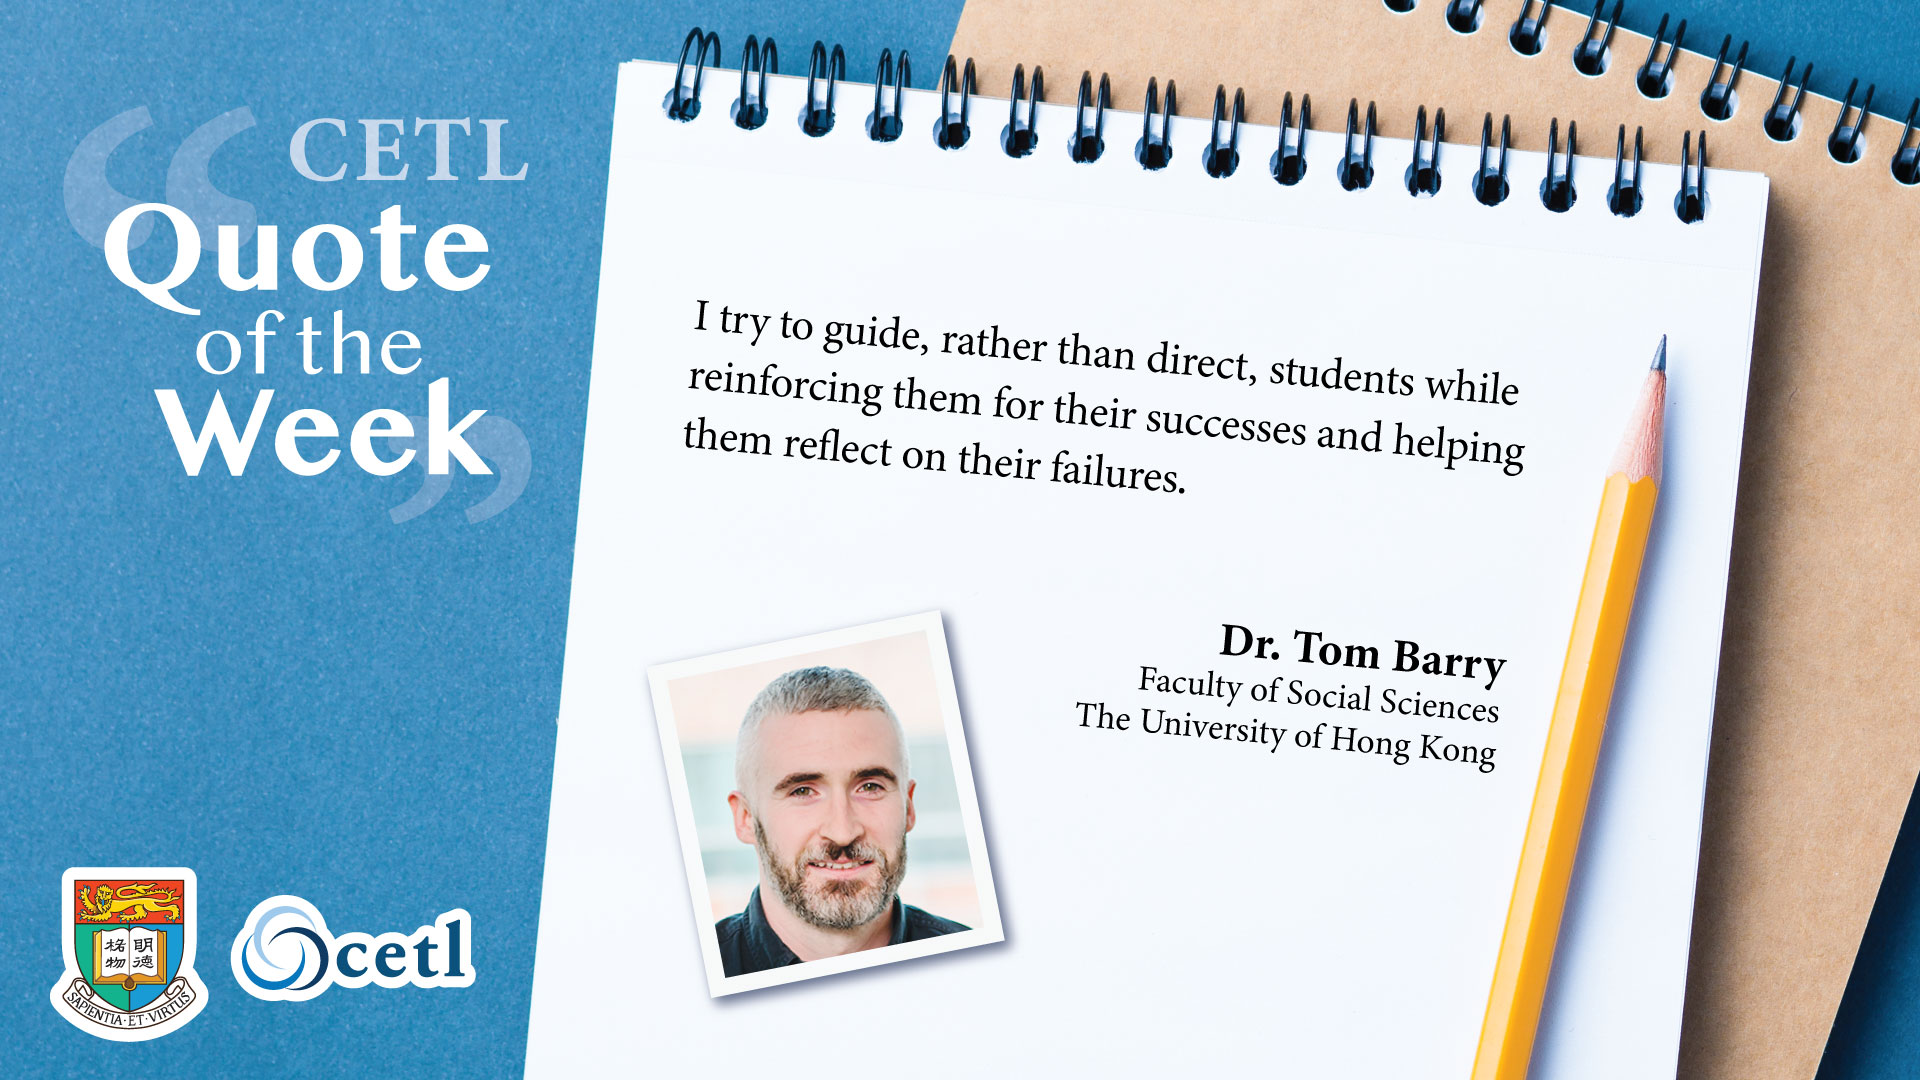 Dr. Tom Barry - I try to guide, rather than direct, students while reinforcing them for their successes and helping them reflect on their failures.